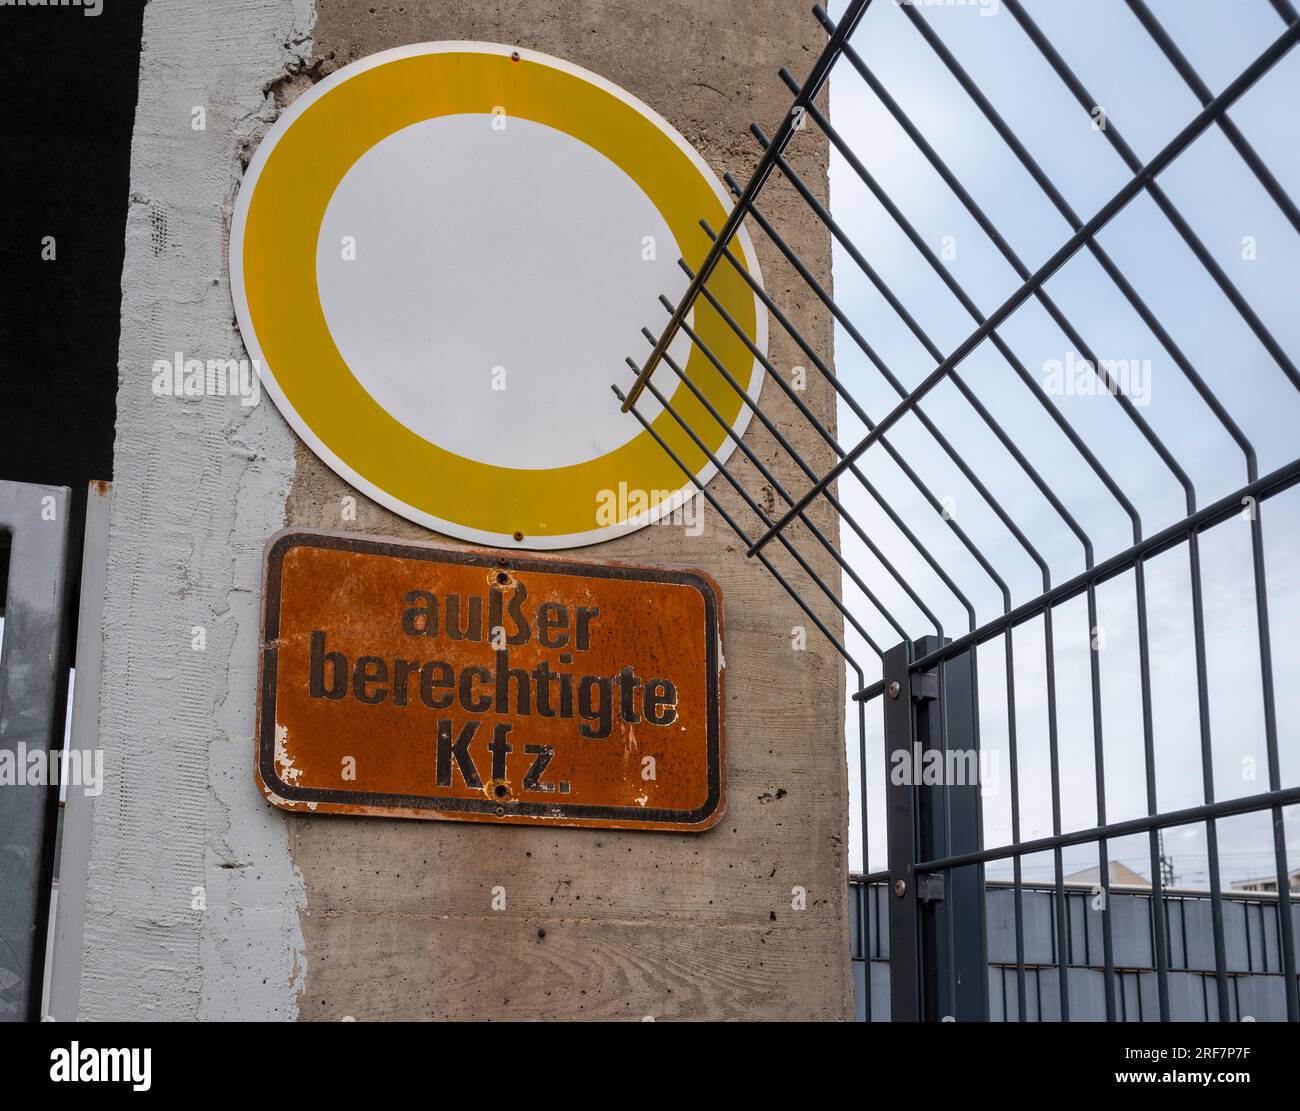 Rusty Traffic Sign At A Property Entrance, Berlin, Germany Stock Photo